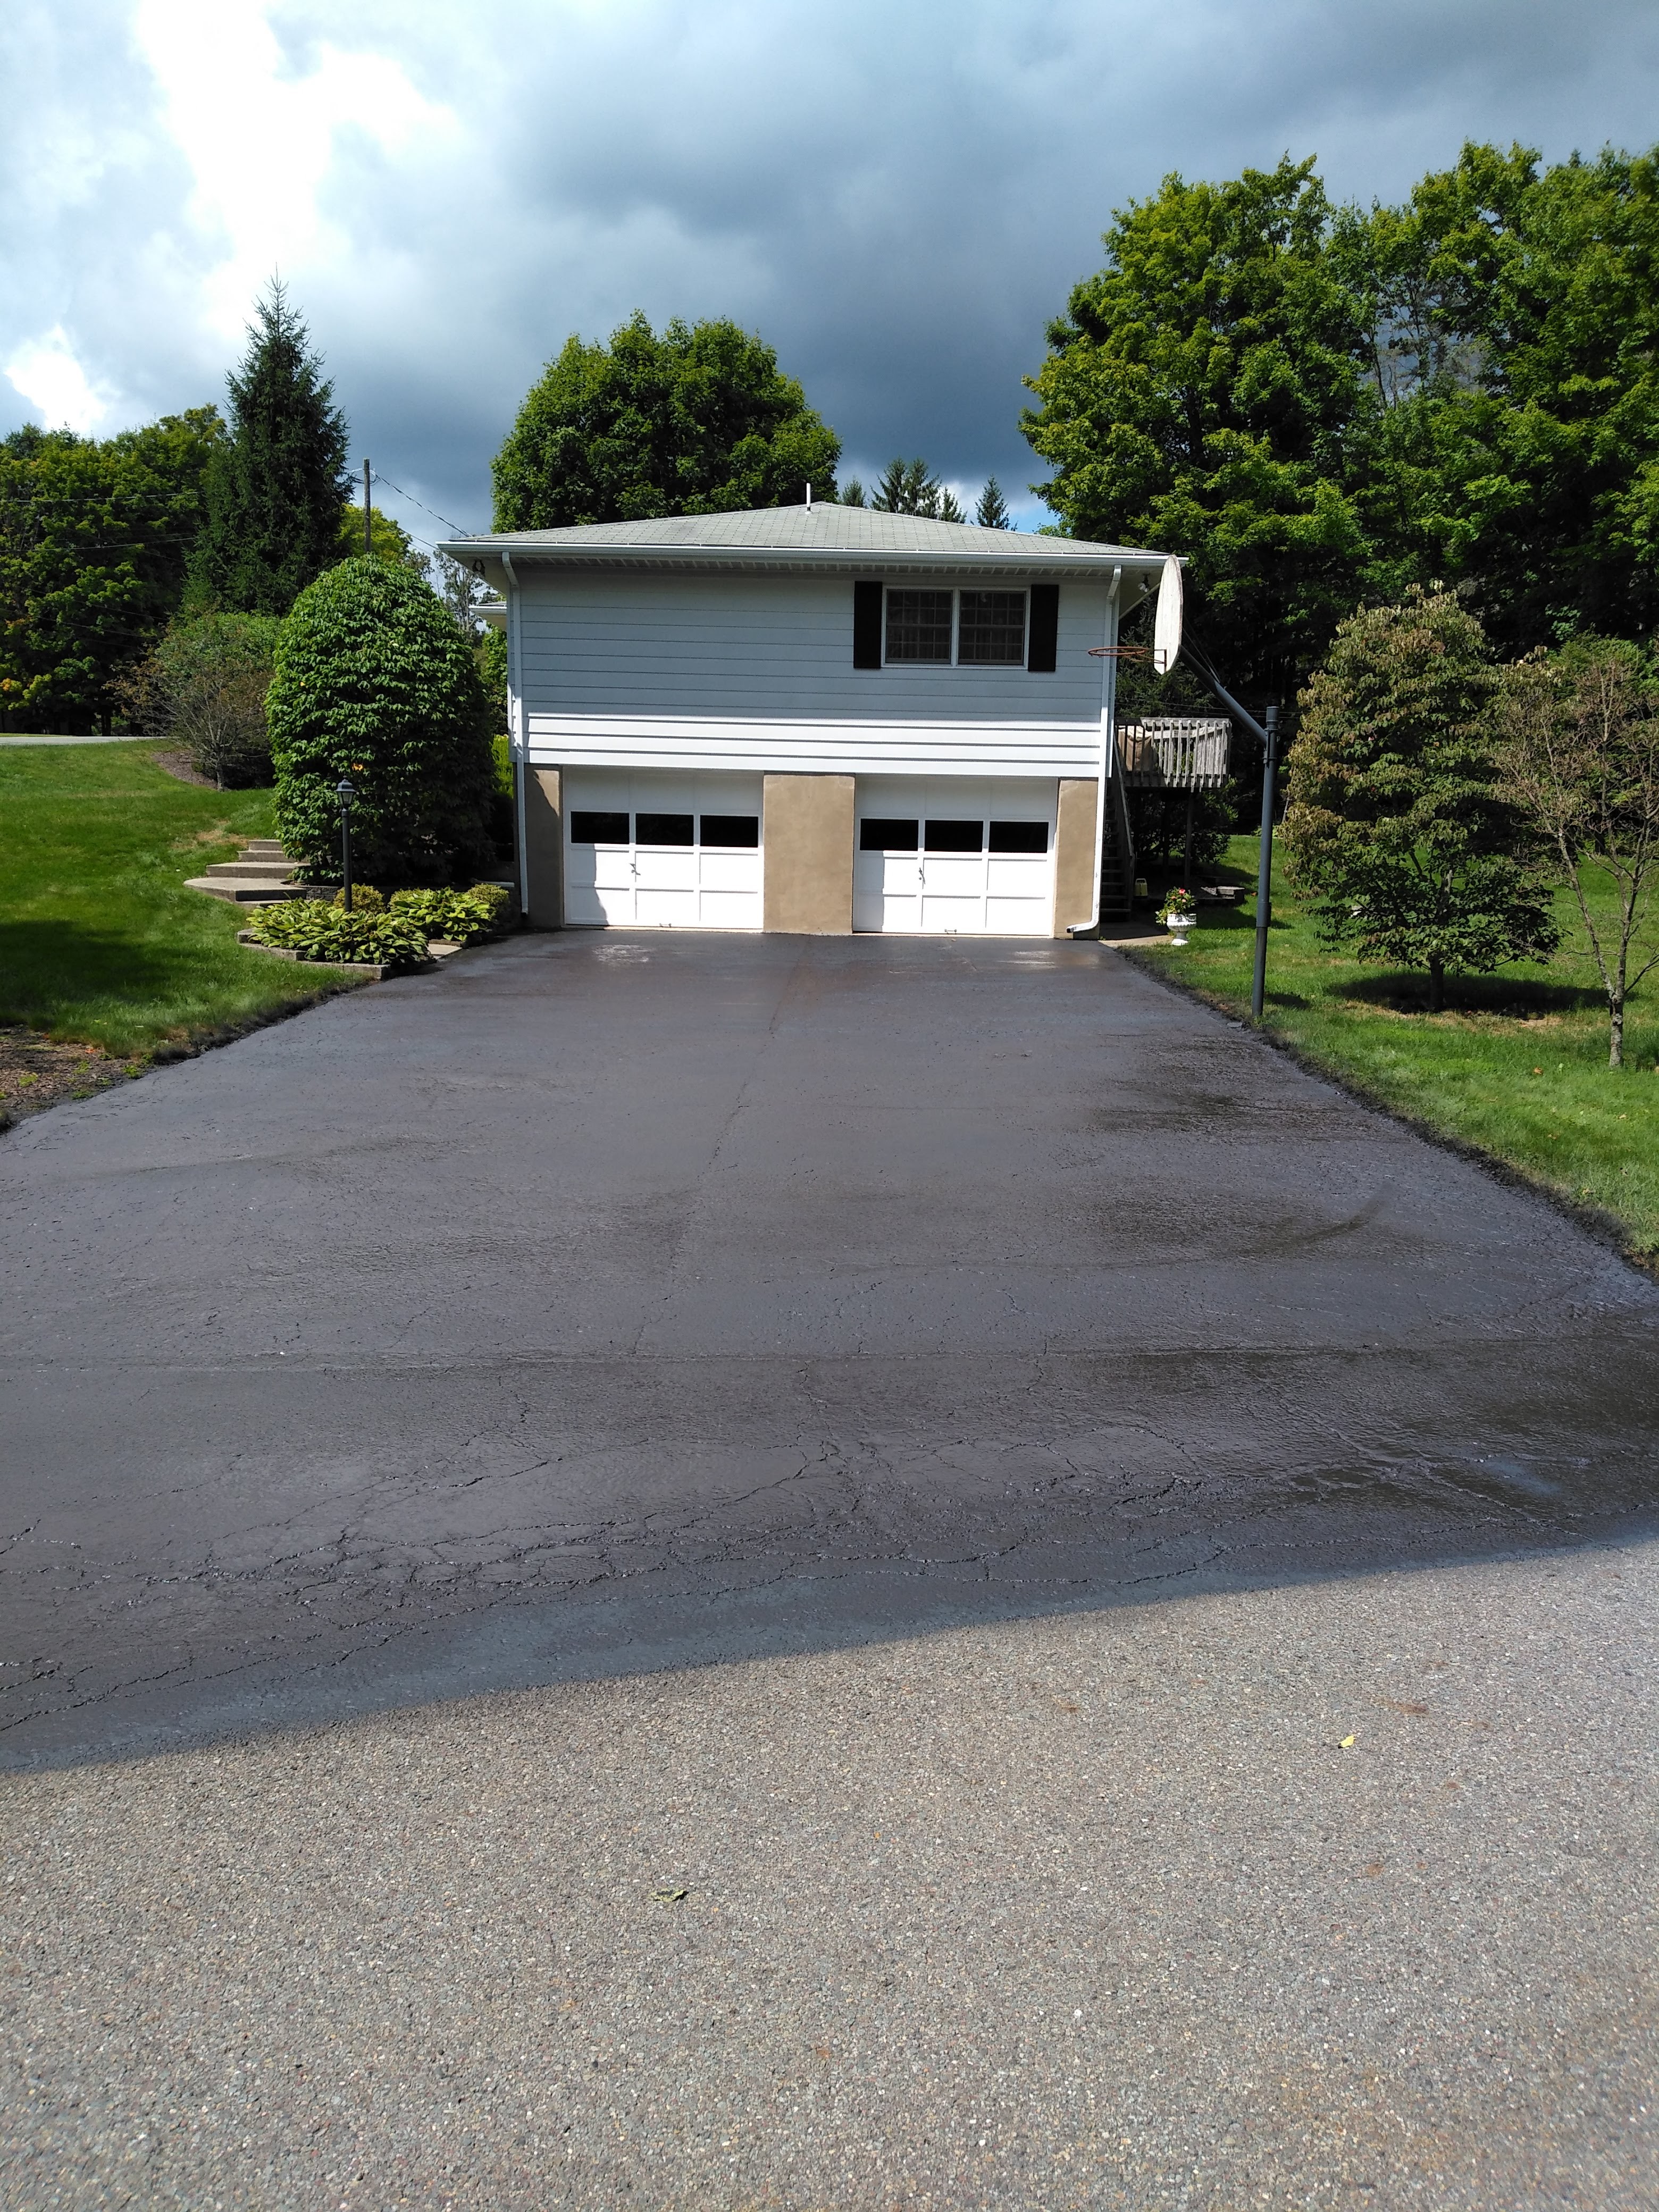 Protect and rejuvenate your asphalt with our seal coating services. At Young and Son's Asphalt & SealCoating in Wilkes-Barre, PA, we apply high-quality sealants that shield your pavement from harsh elements, enhancing its durability and appearance.